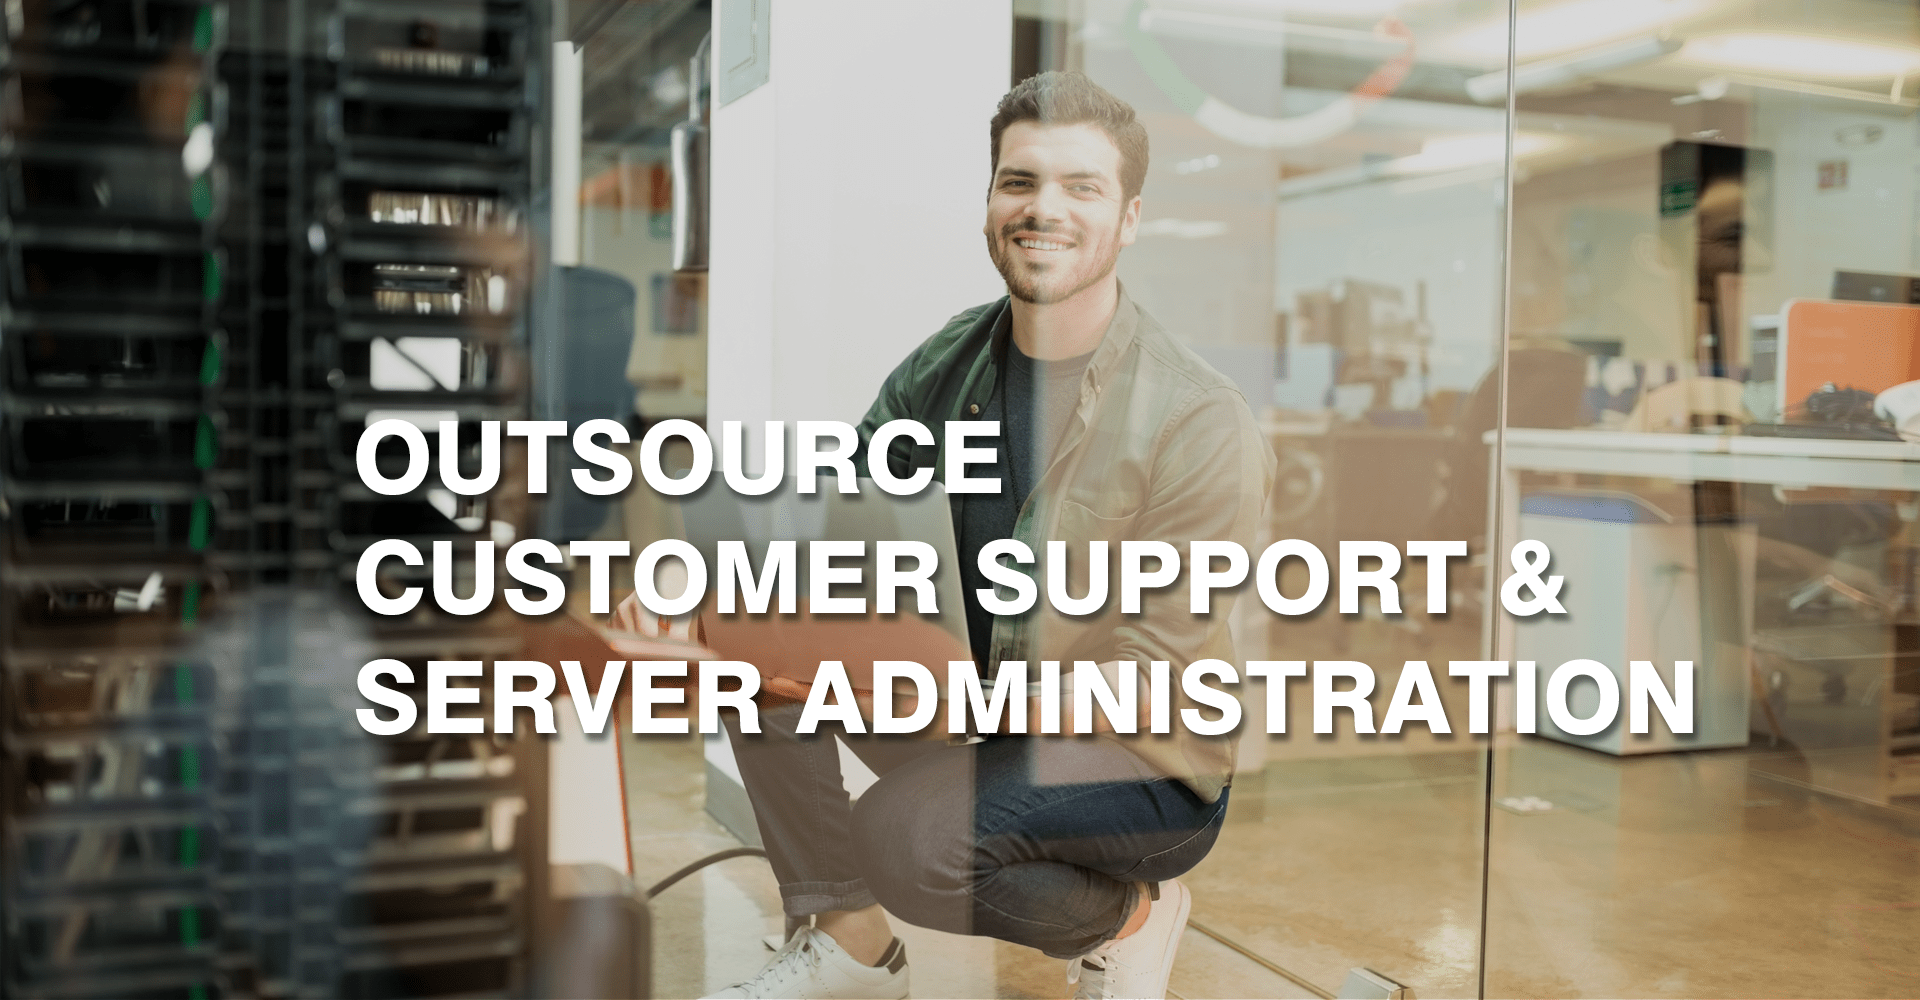 Outsource Customer Support & Server Administration